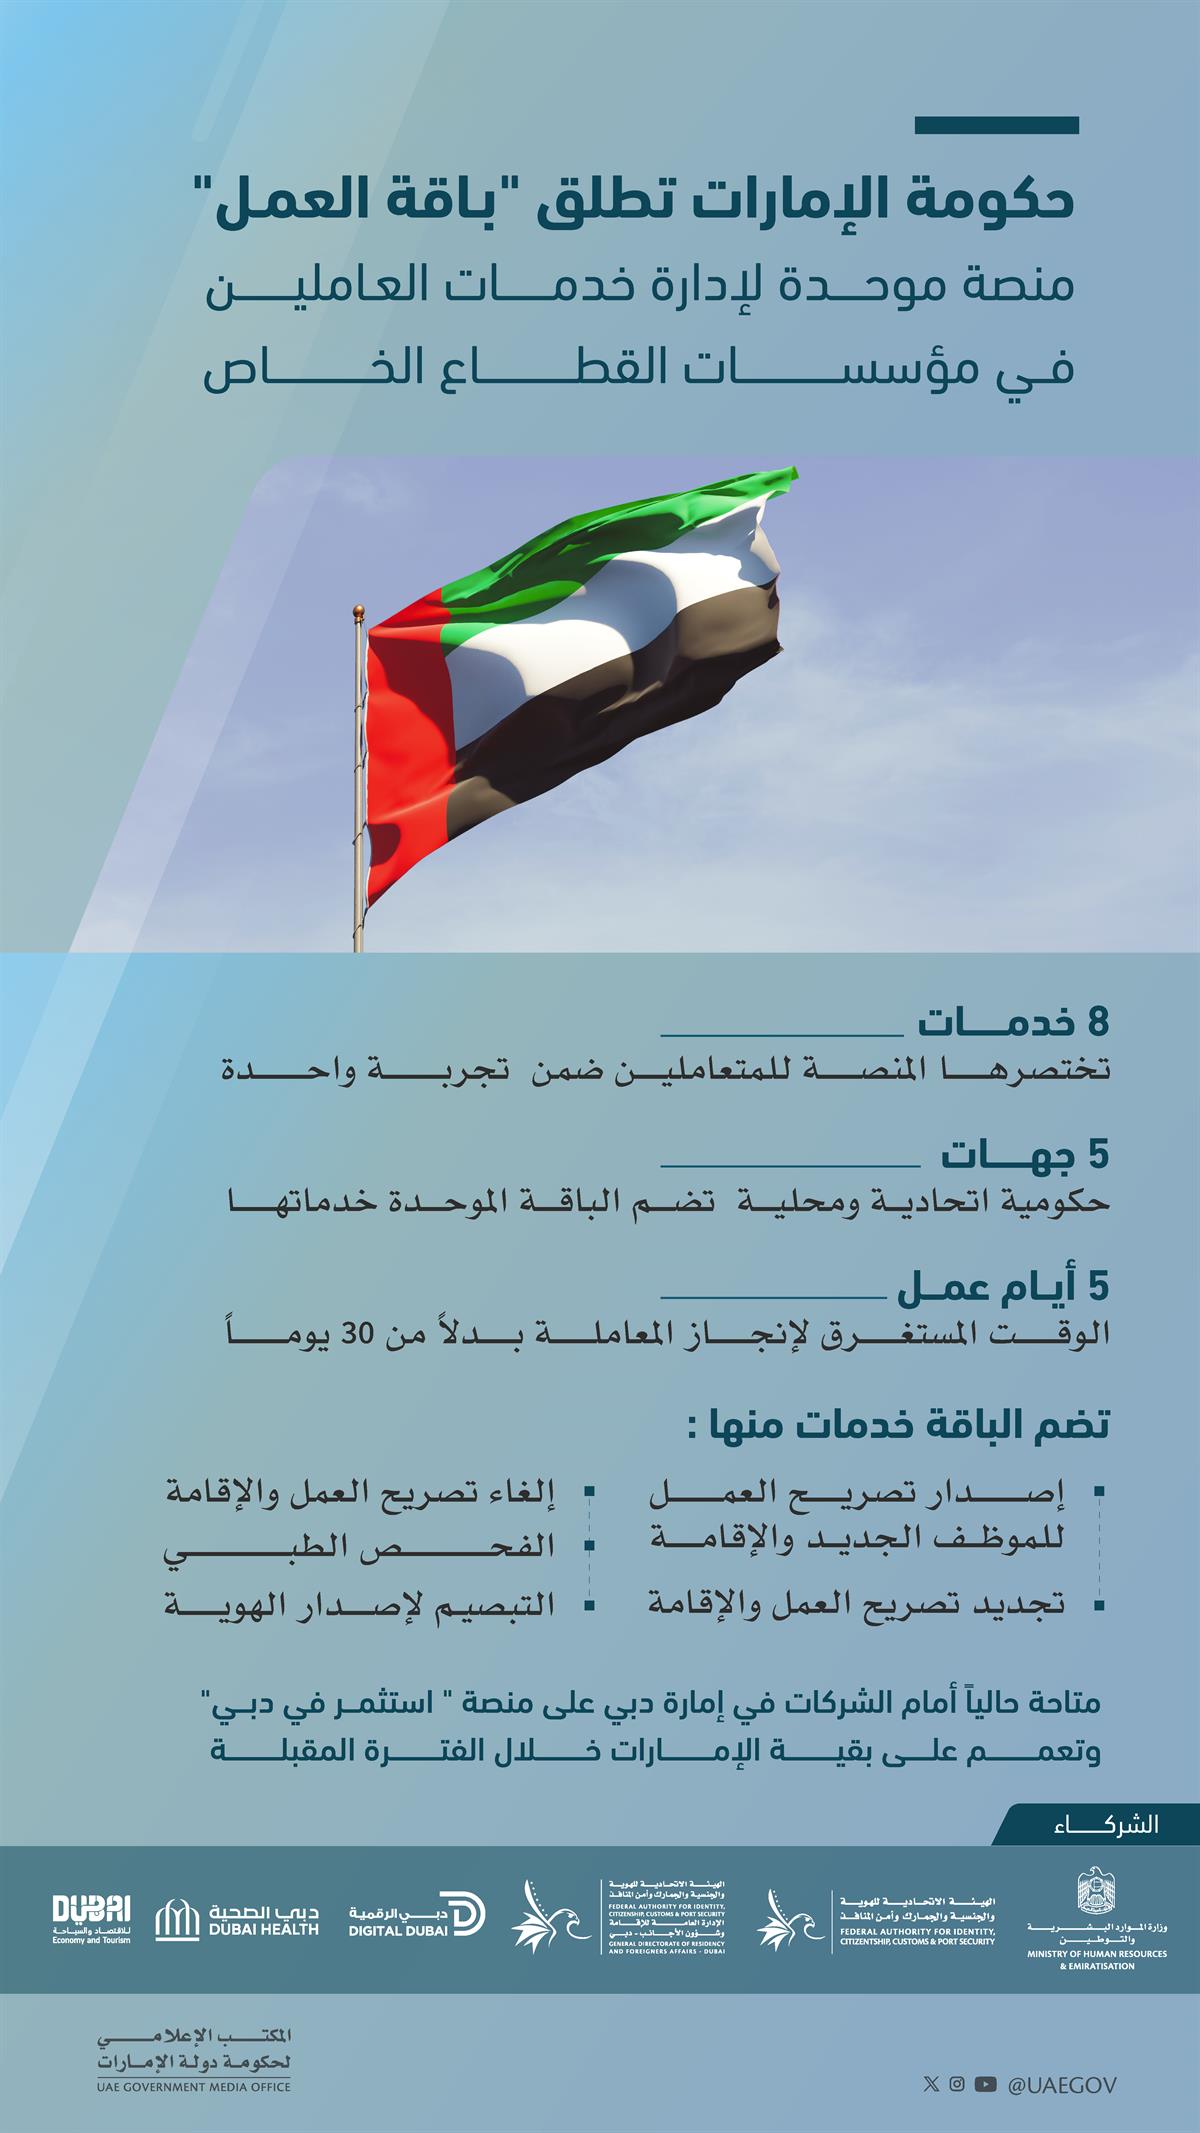 UAE government launches “Work Bundle” to facilitate work permits and residency procedures in private sector